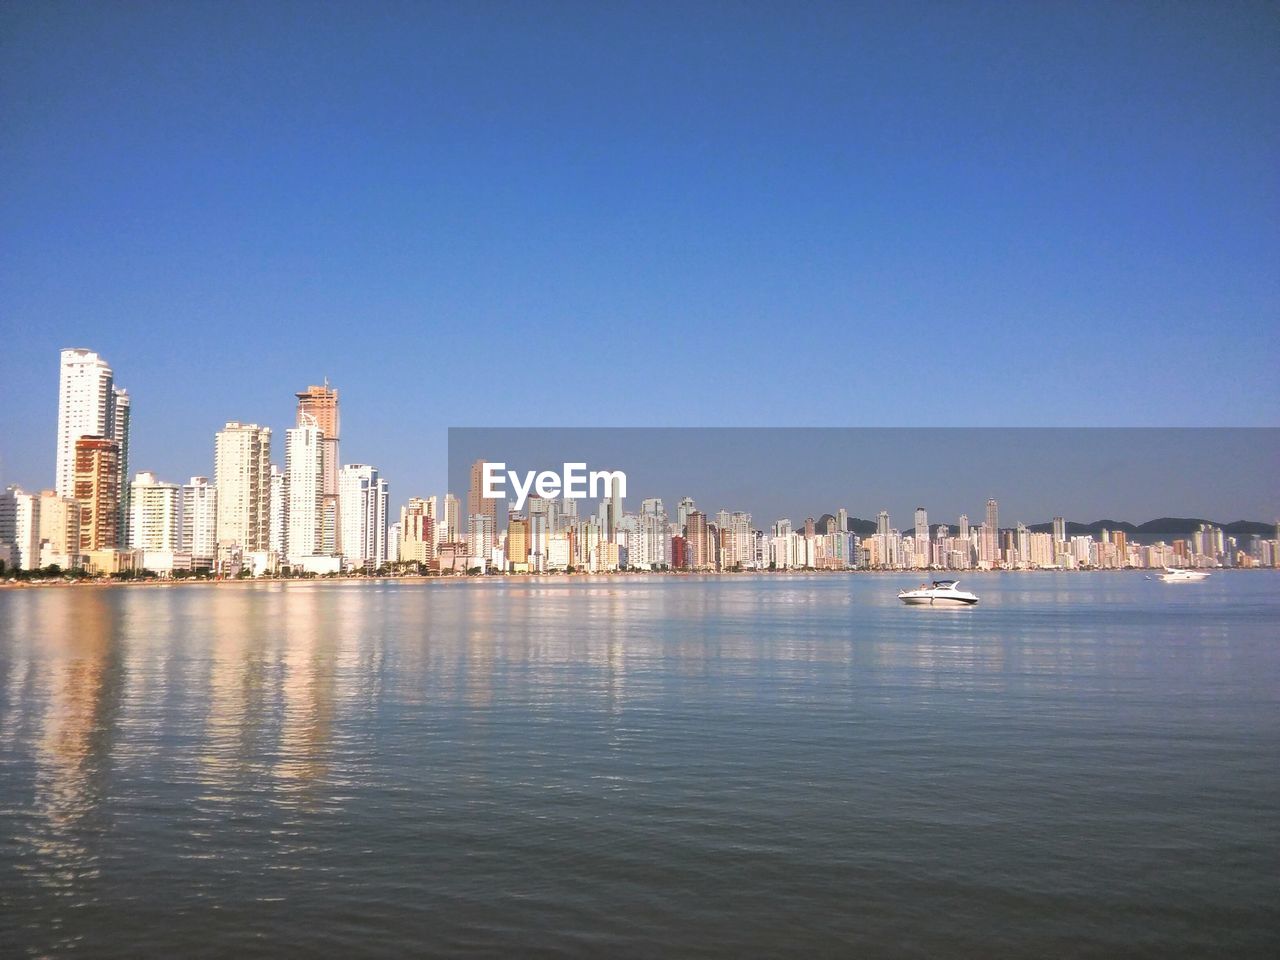 Sea by cityscape against clear blue sky